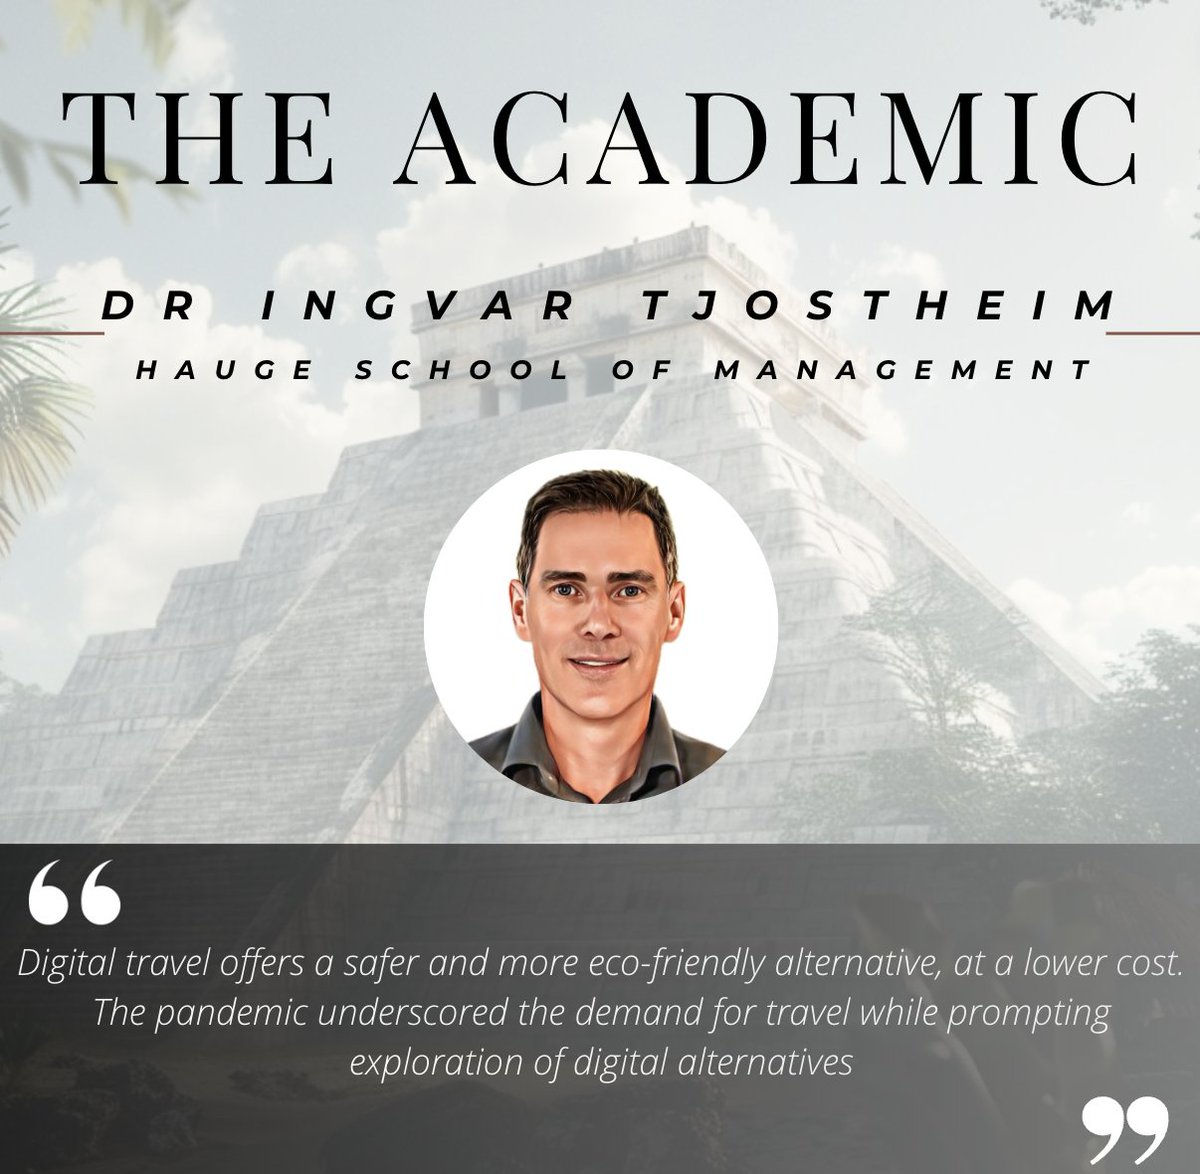 Q&A: Why would you choose to travel digitally, rather than physically?  Dr Ingvar Tjostheim
@umeauniversity @NLAHogskolen

The Article: theacademic.com/is-there-a-mar…

#digitalexperiences #digitaltravel #metaverse #mexico